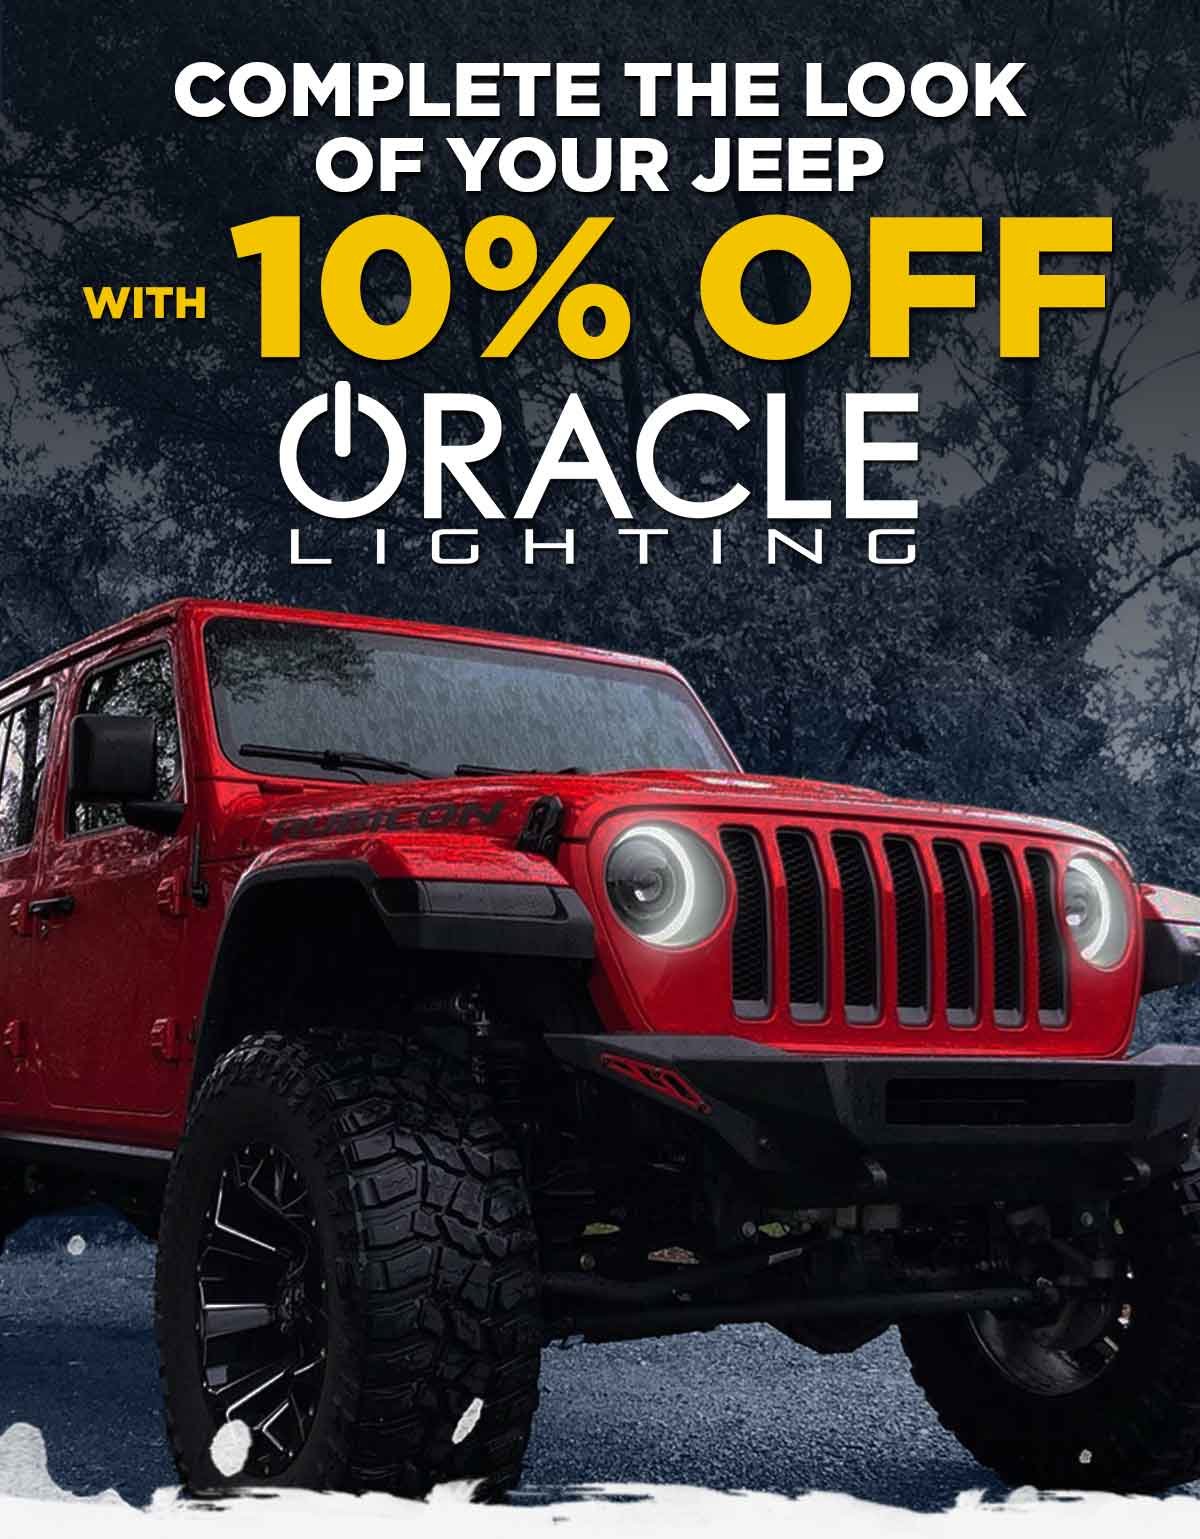 Complete The Look Of Your Jeep With 10% Off Oracle Lighting